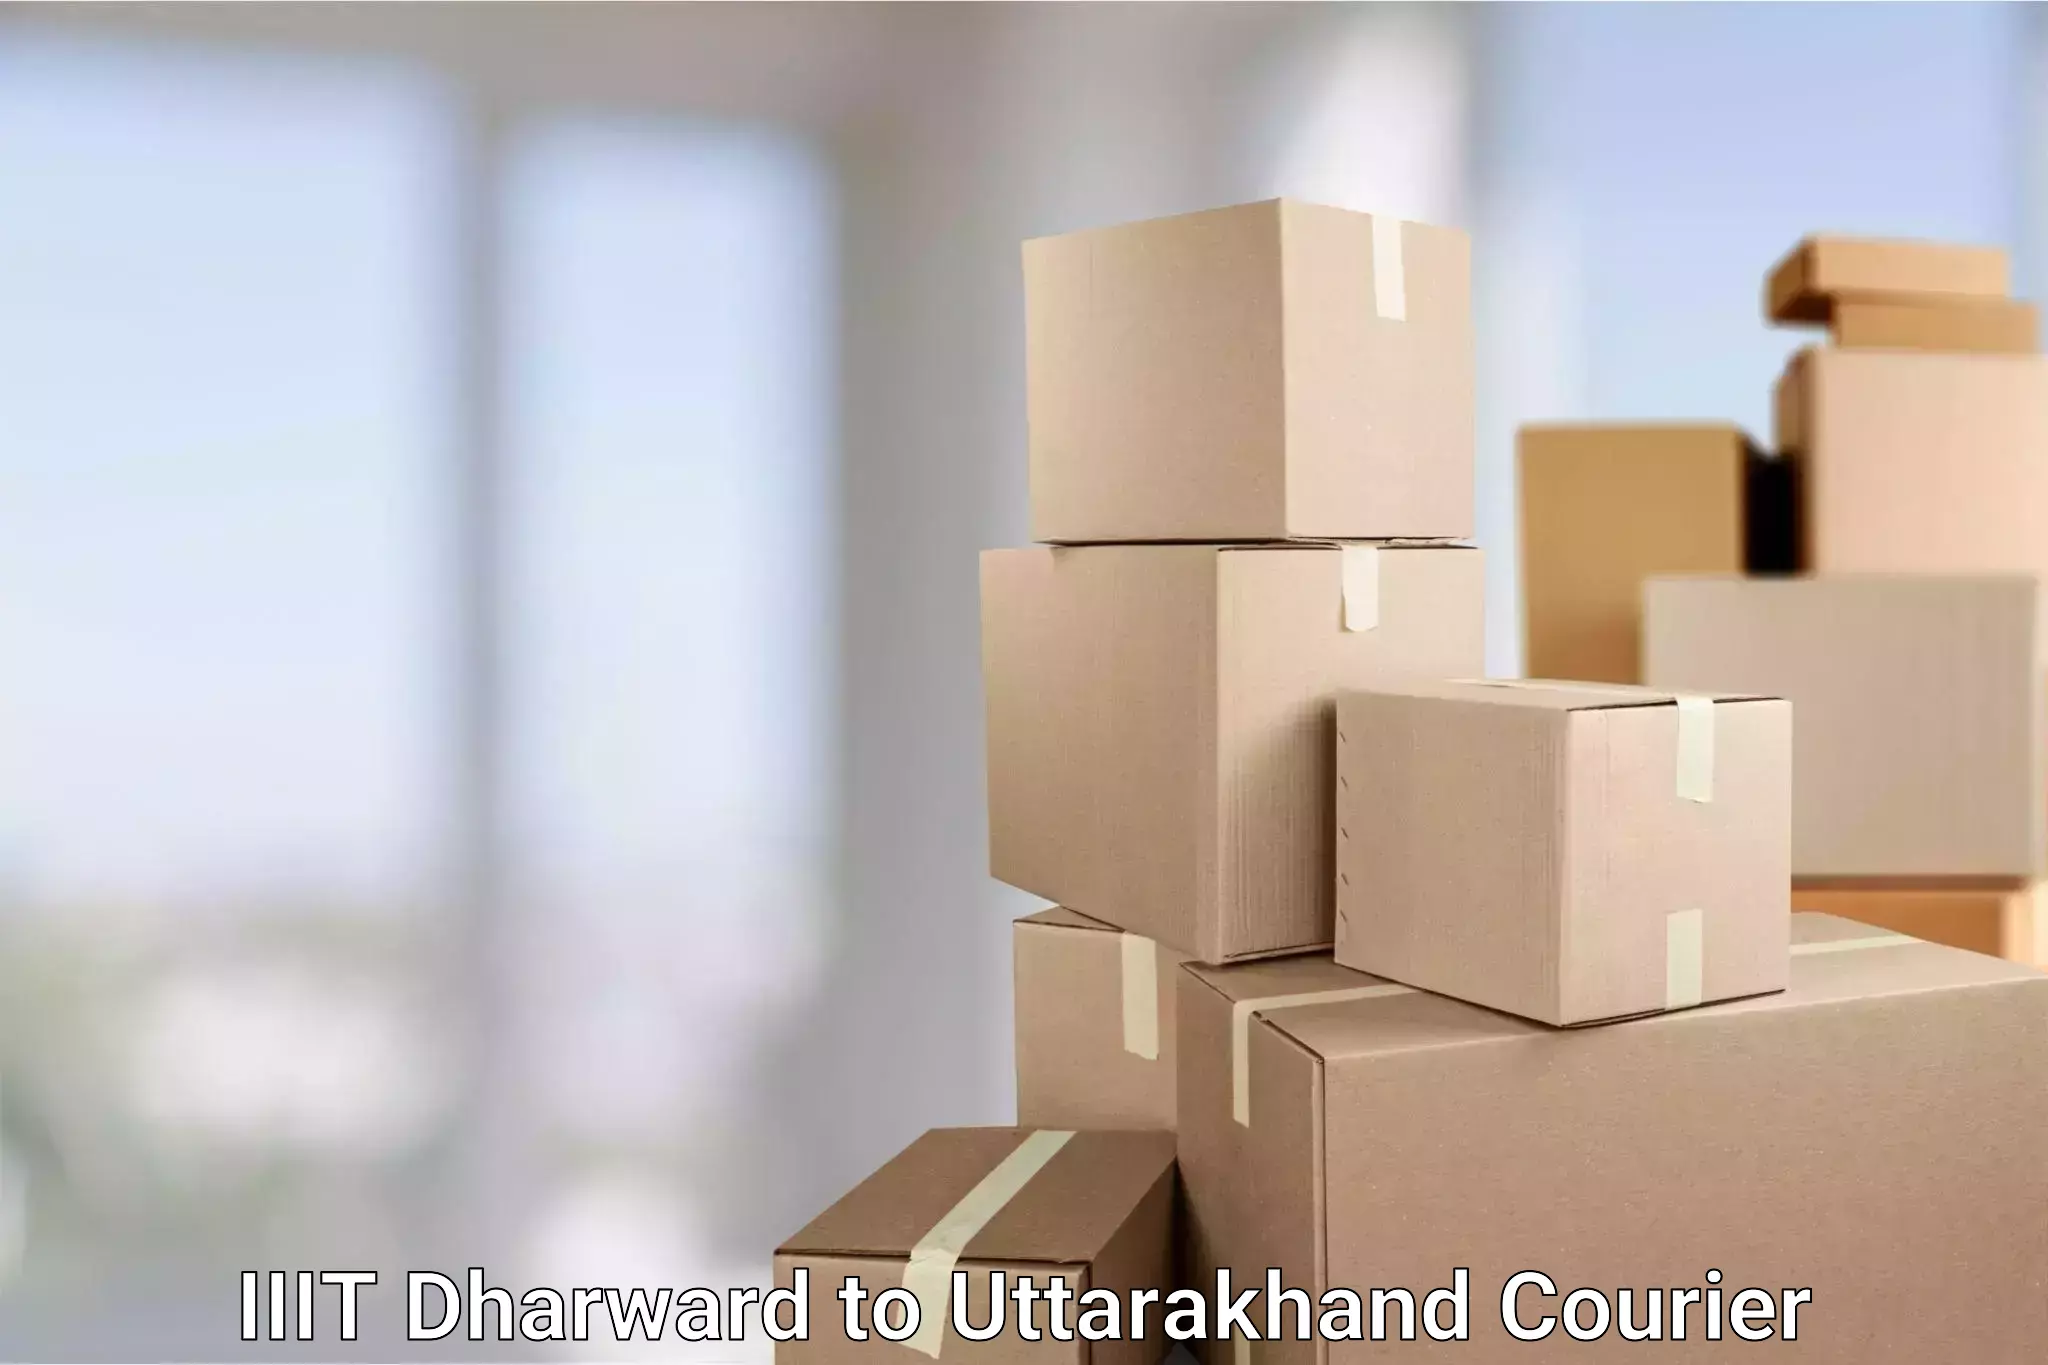 Nationwide parcel services IIIT Dharward to Rishikesh